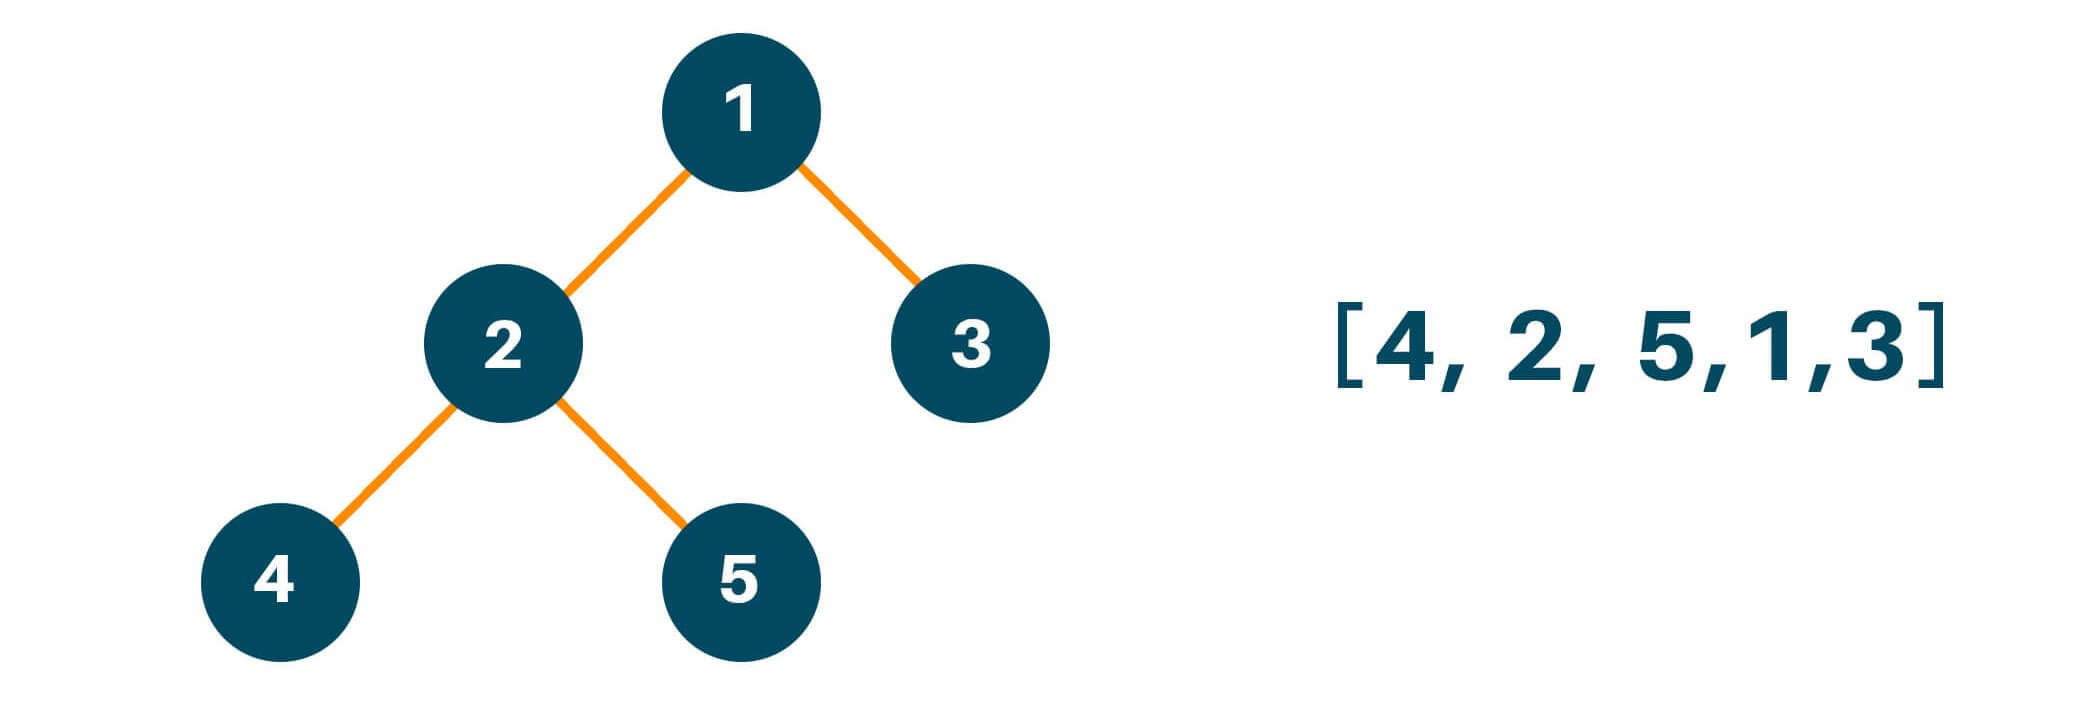 Example of Preorder Tree Traversal